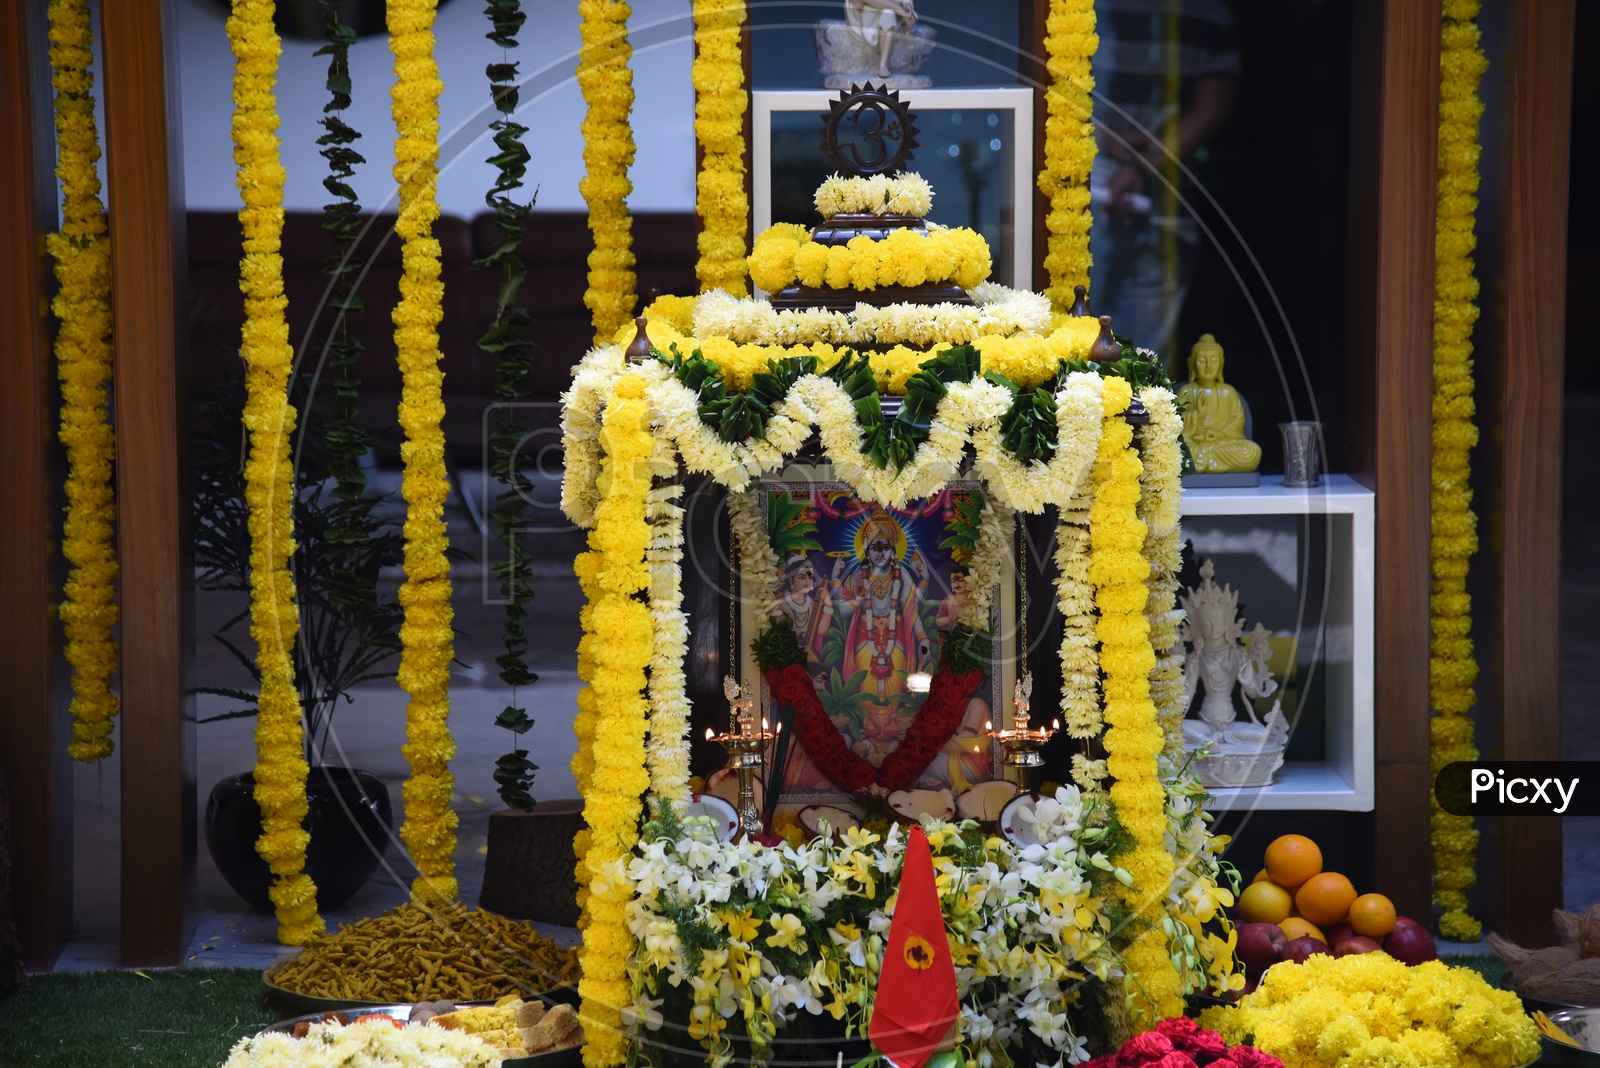 20 Ganpati Flower Decoration Ideas to Consider in 2023 - with Images